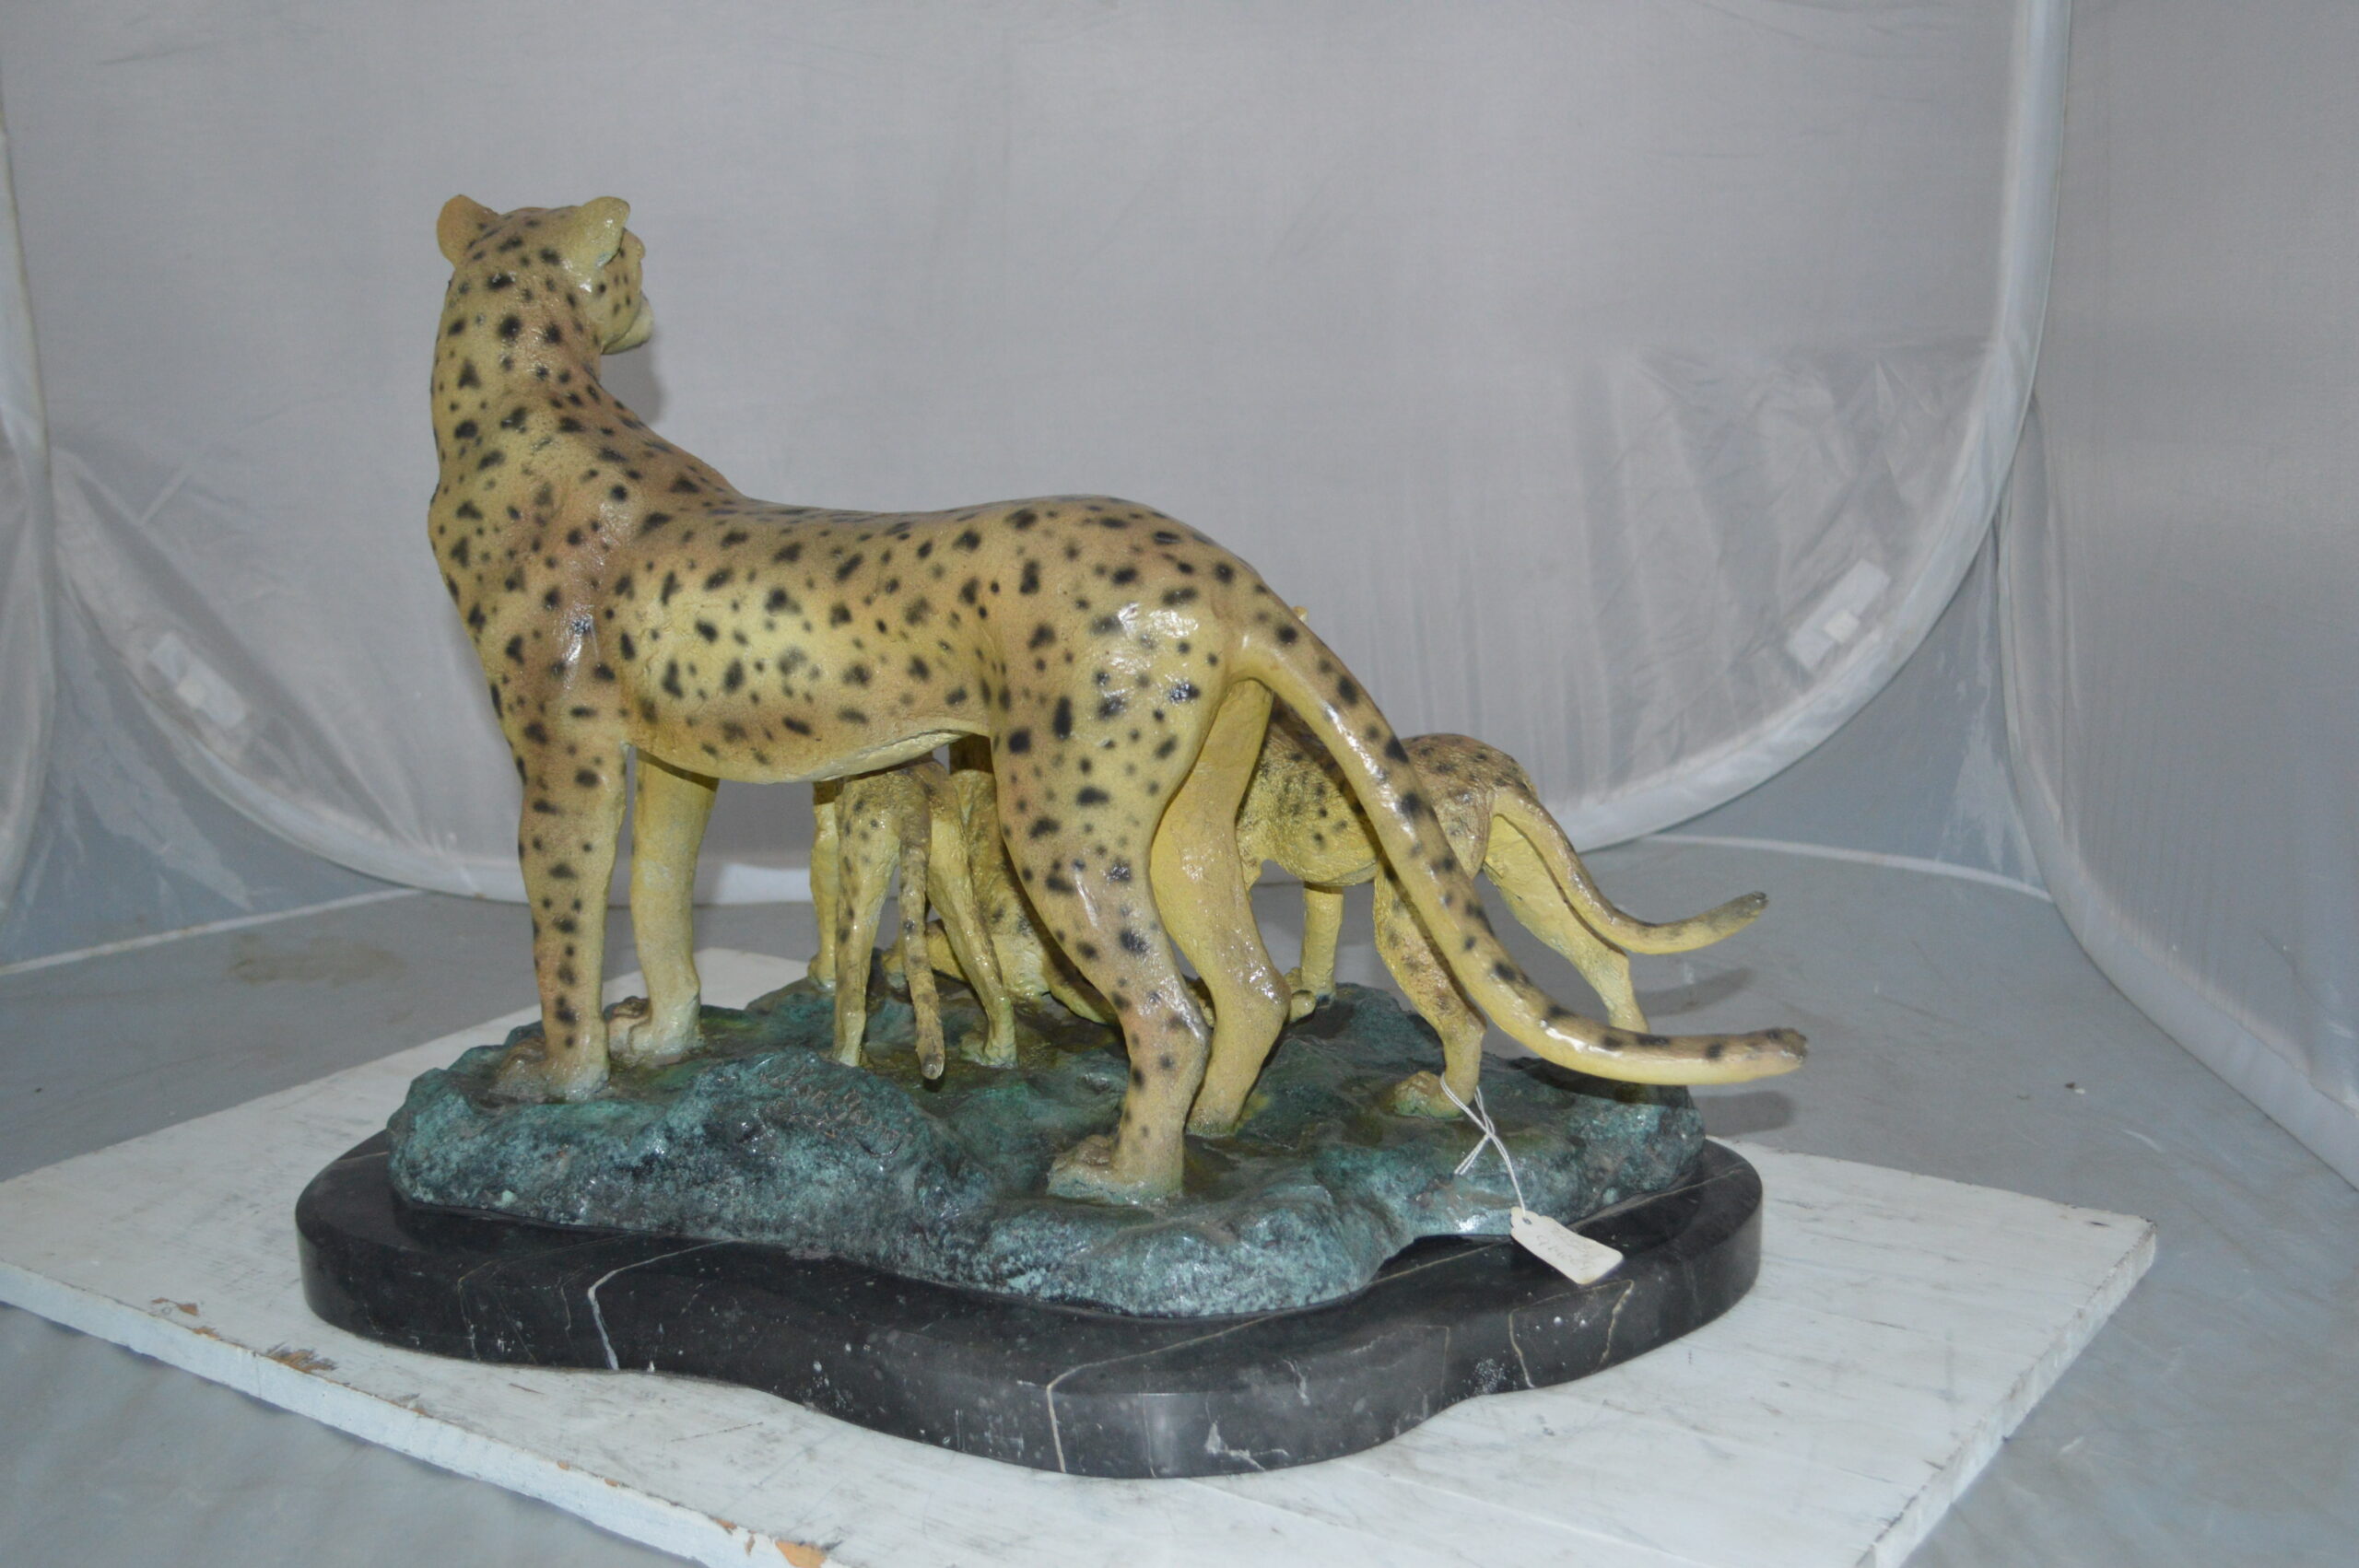 Cheetah Family Bronze Statue on Marble - Size: 24L x 14W x 18H